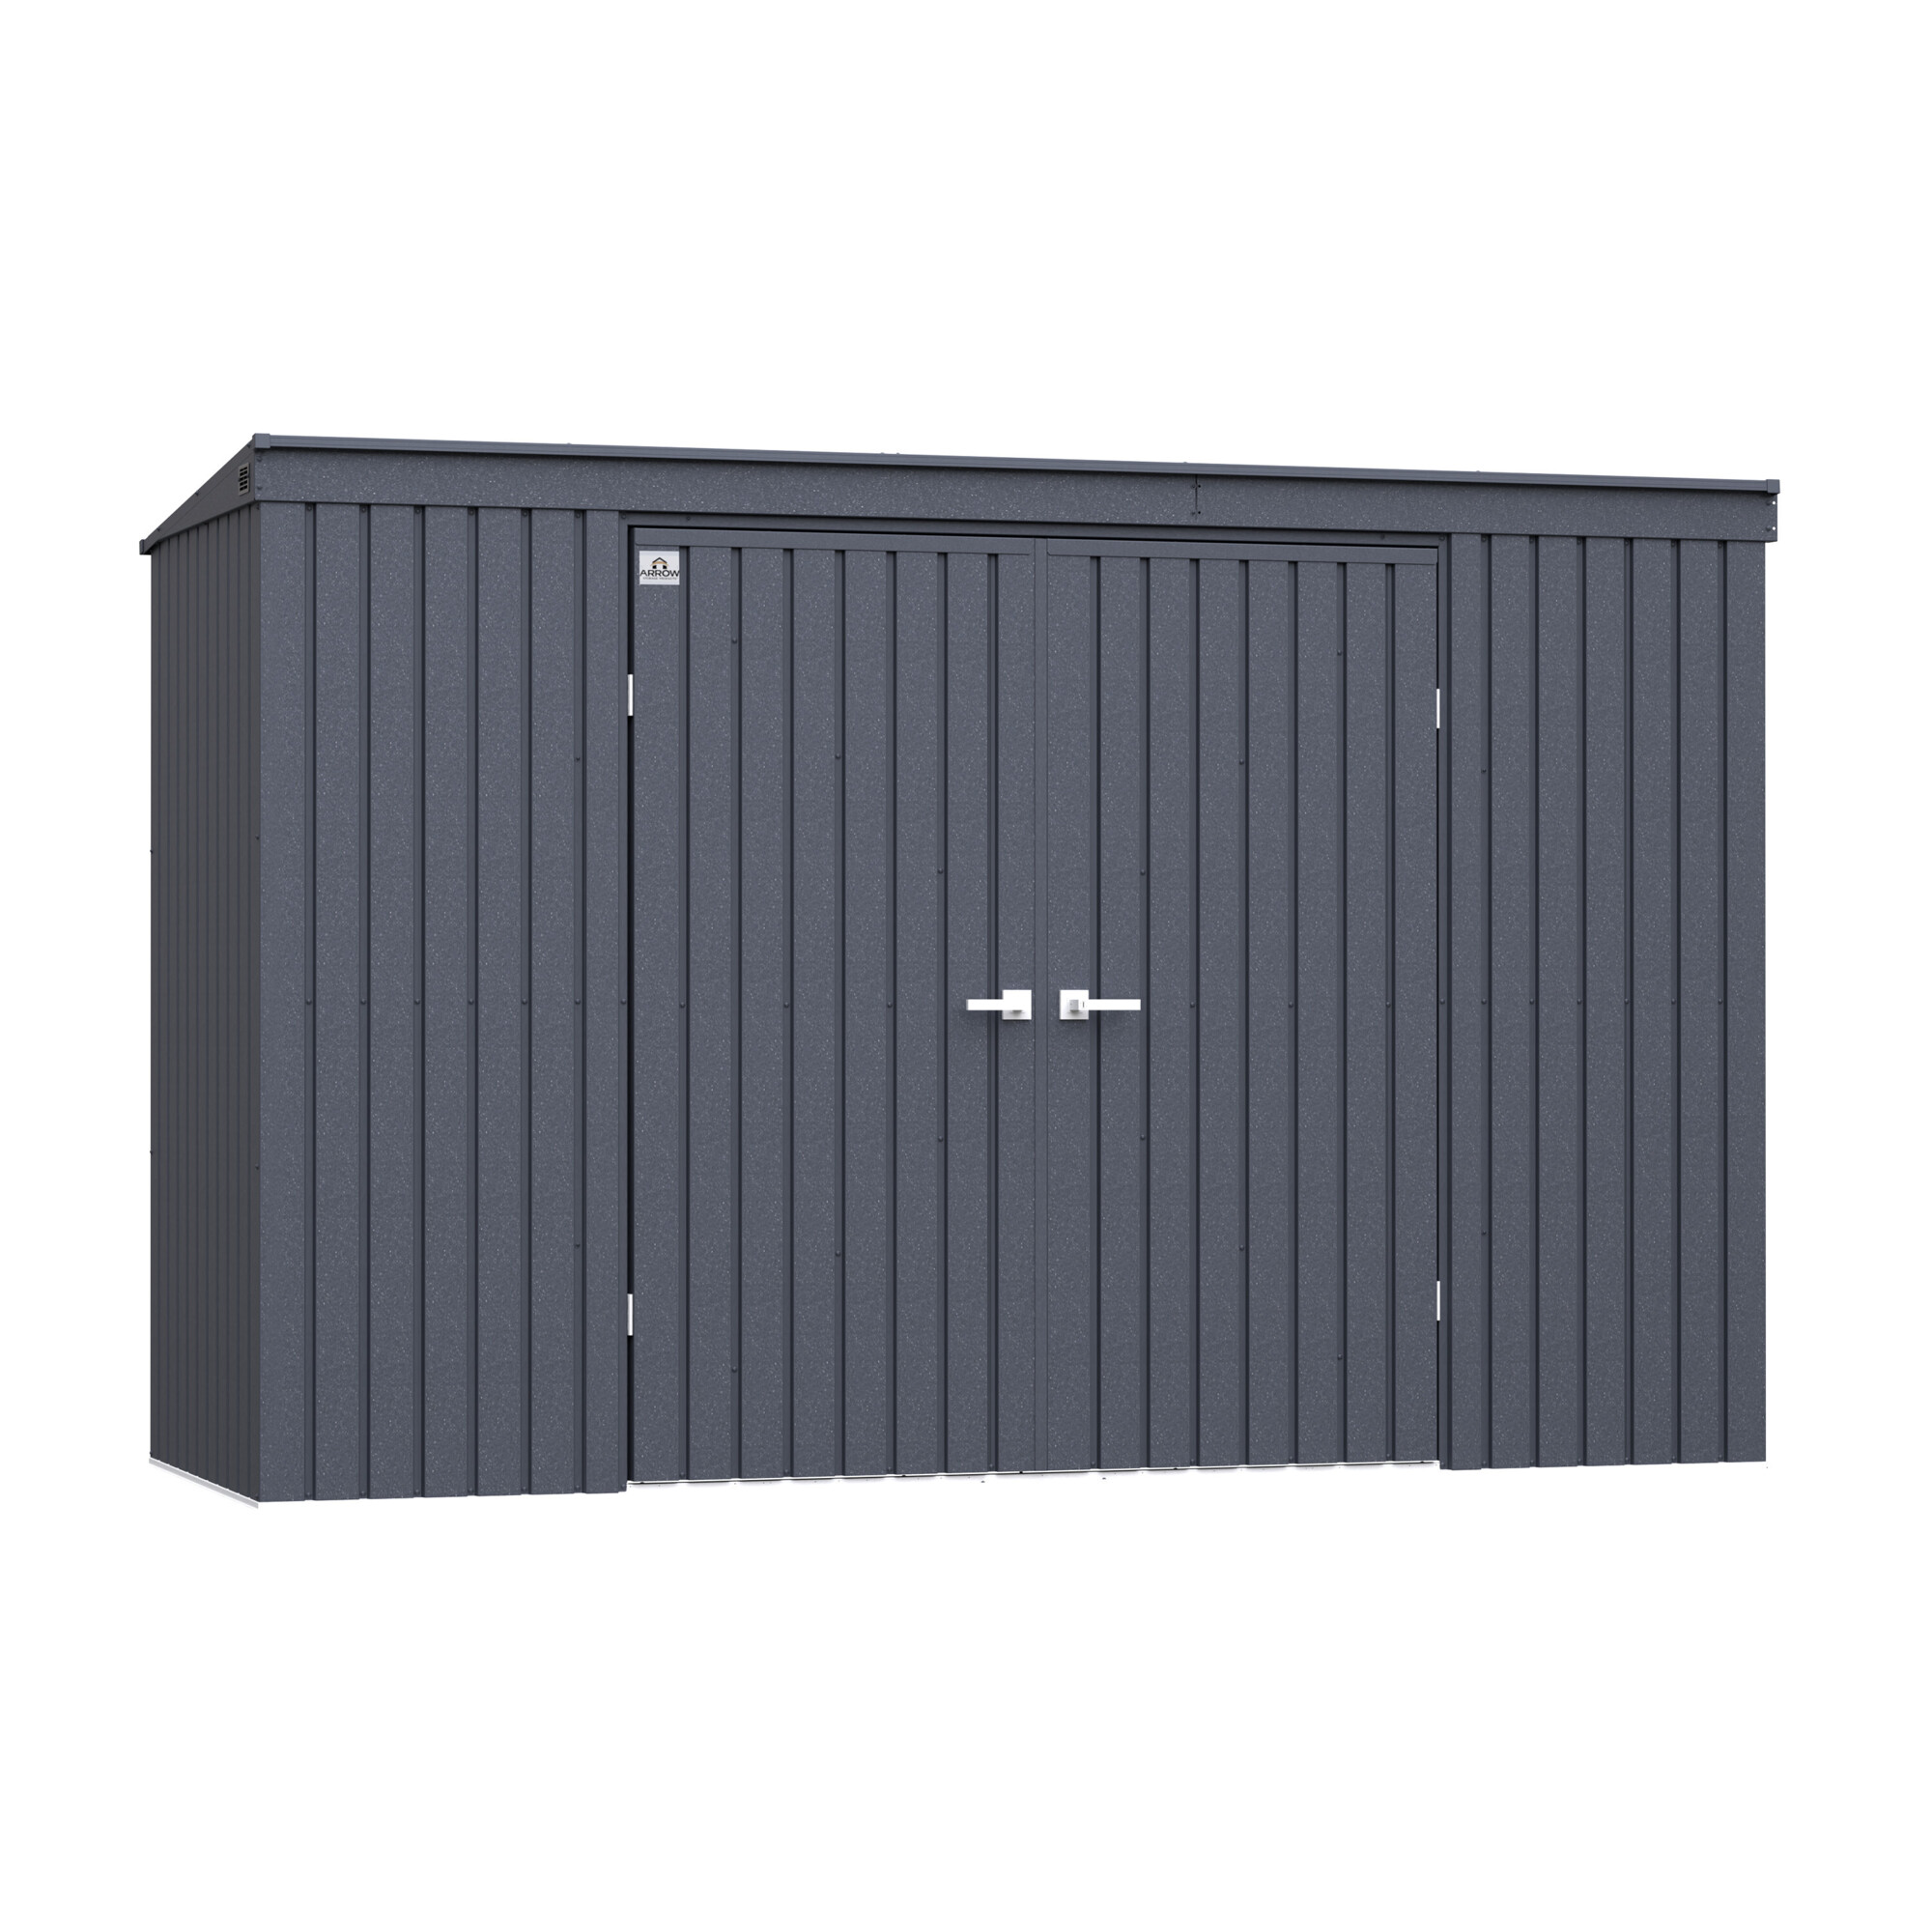 Arrow Storage Products, Elite Steel Shed 10x4 Anthracite EP104AN, Length 4 ft, Width 10 ft, Model EP104AN